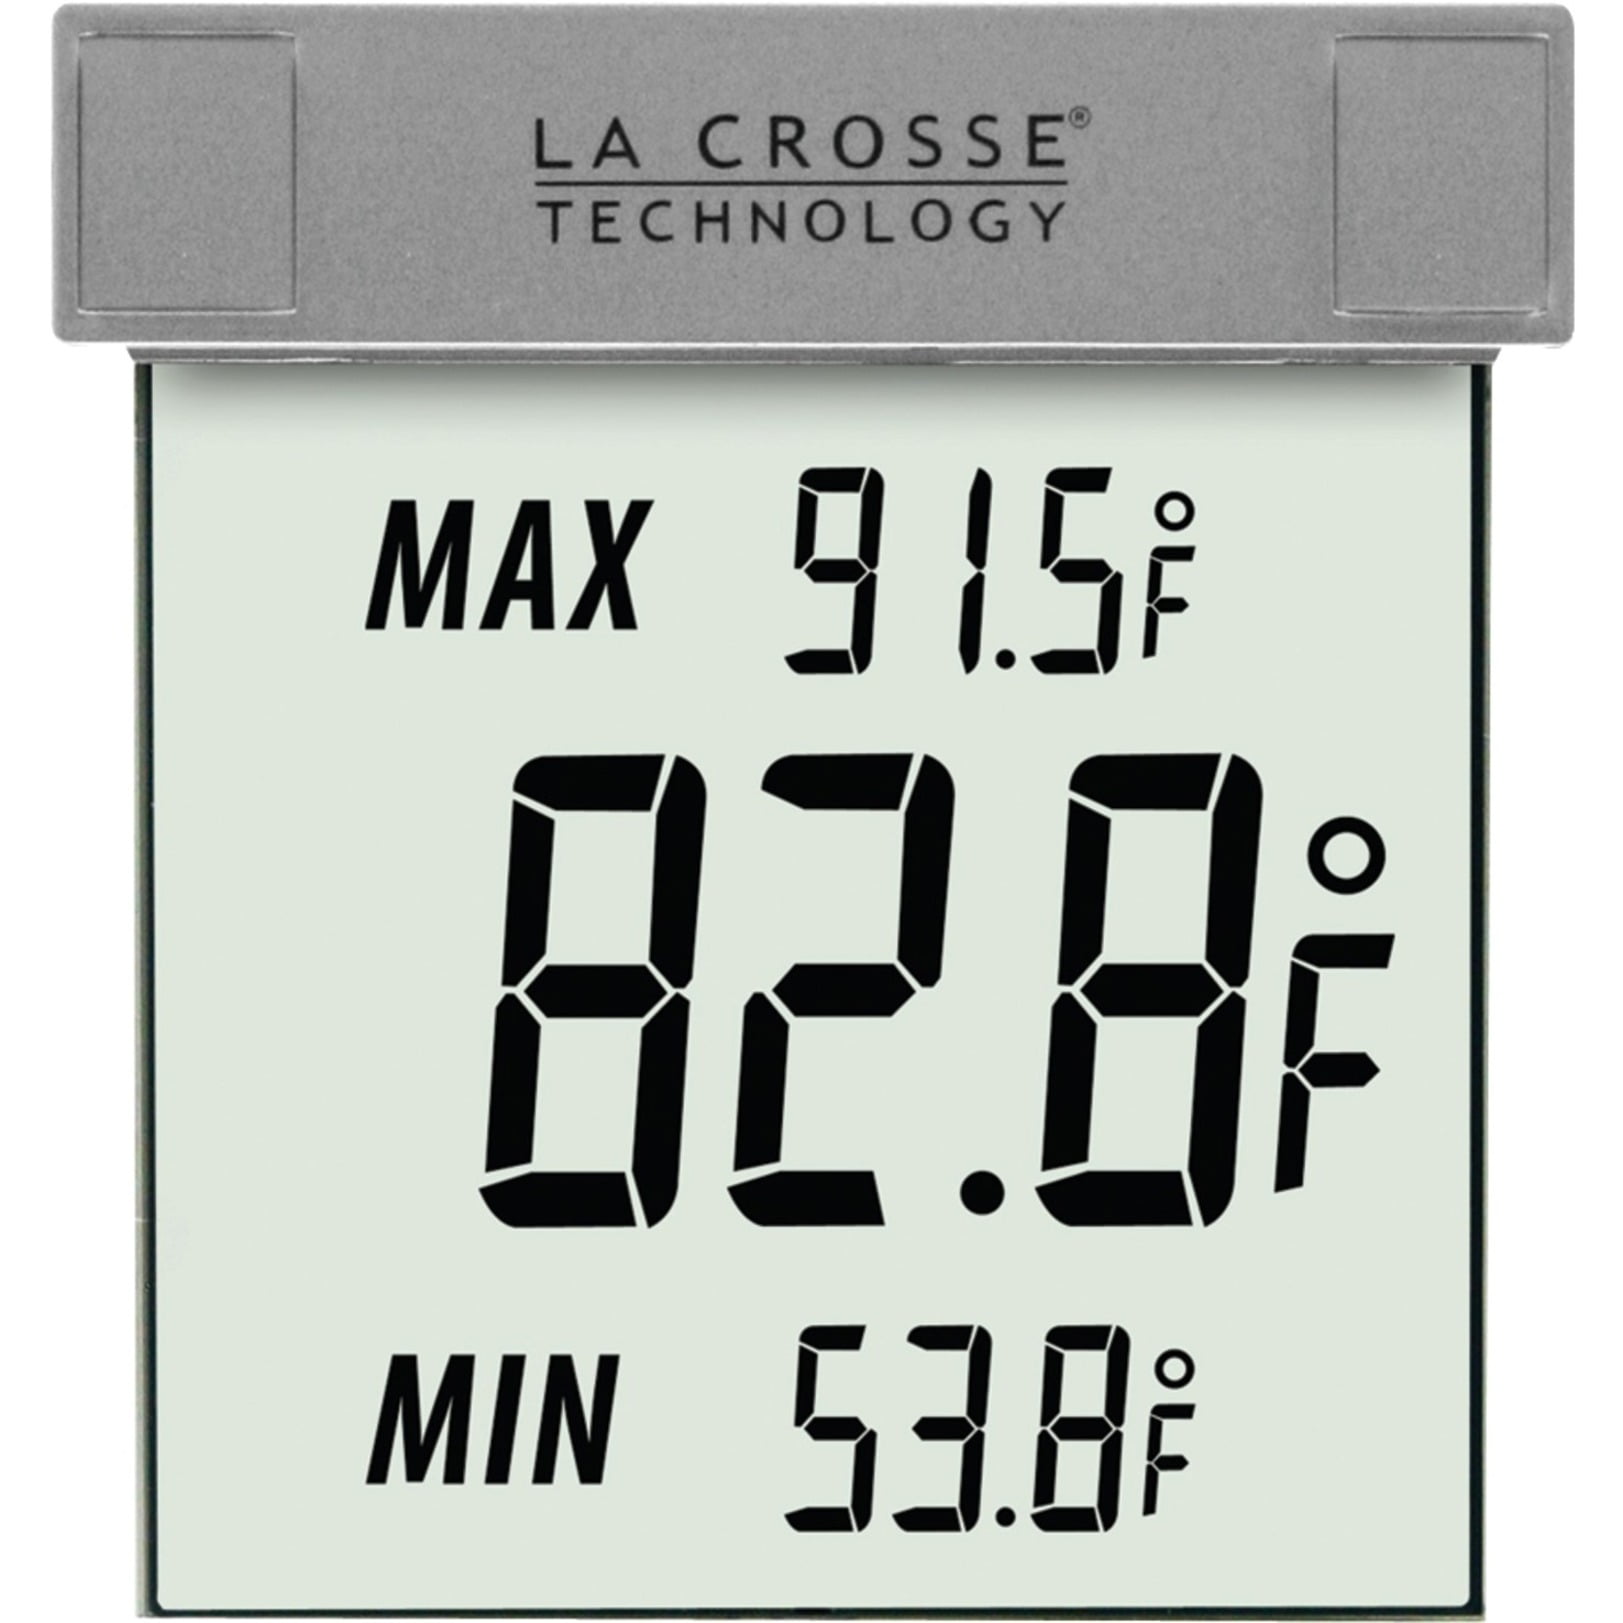 La Crosse Technology WS-1025 Outdoor Window Thermometer